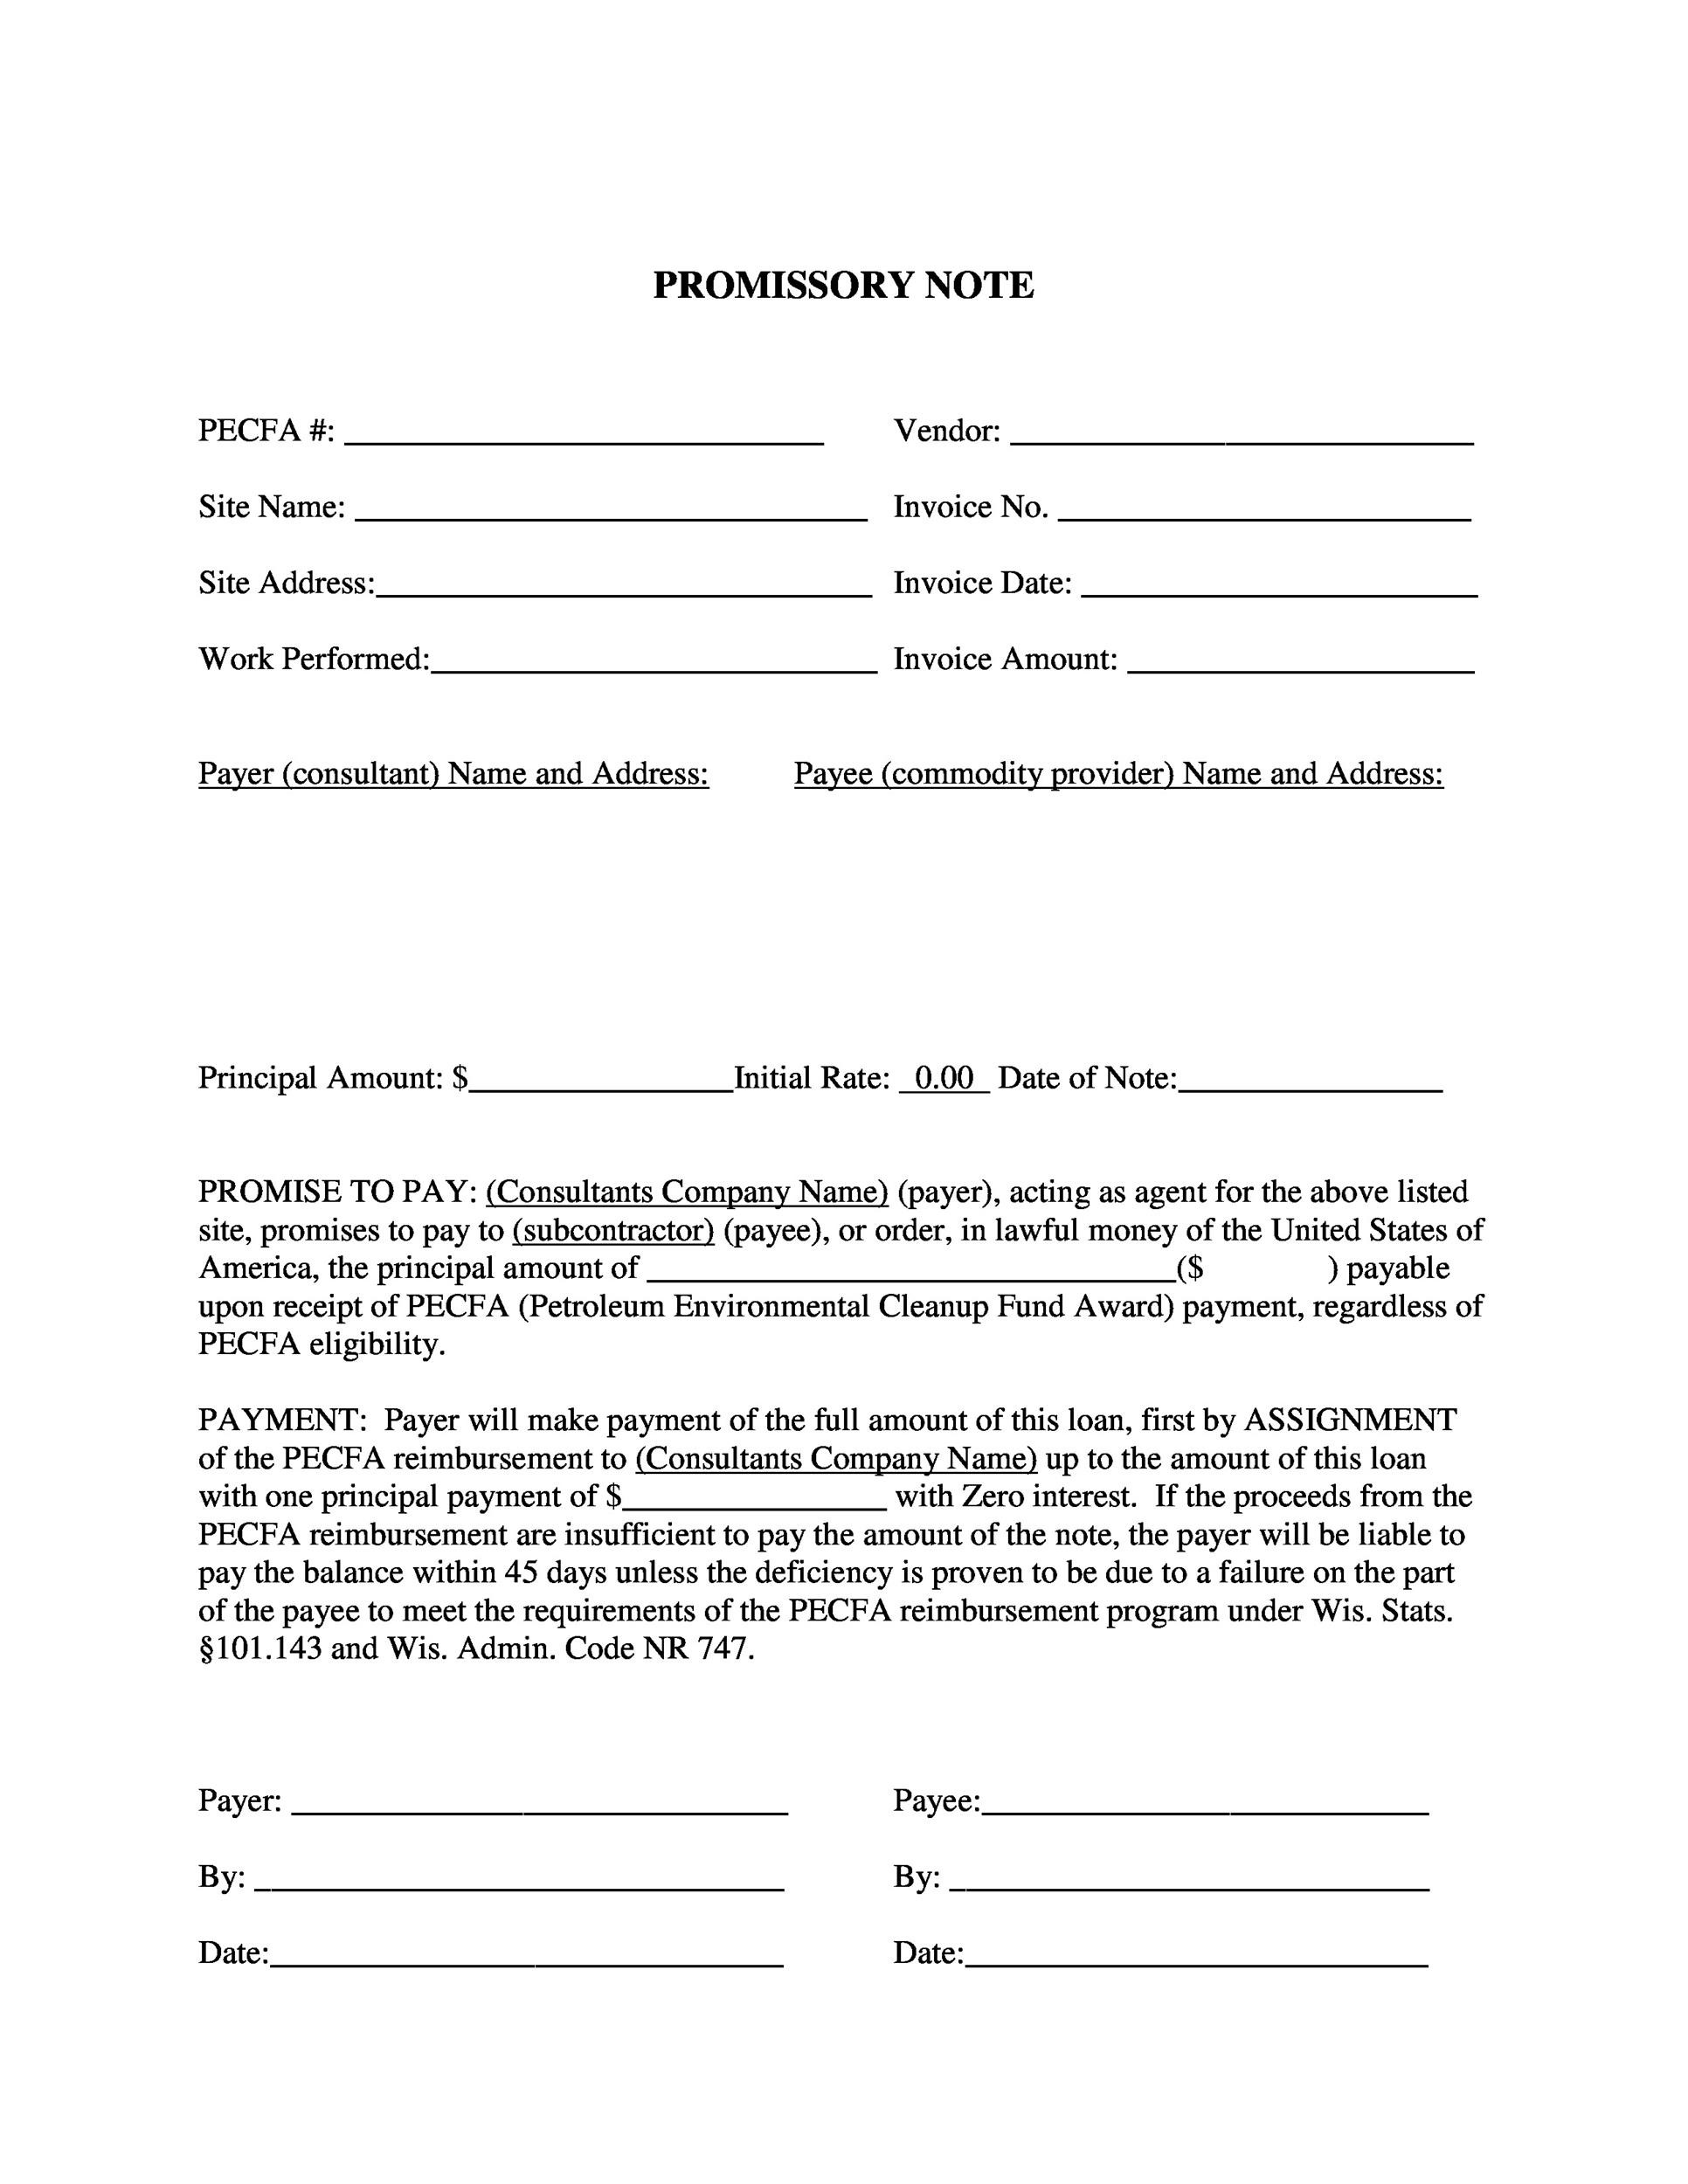 printable-promissory-note-template